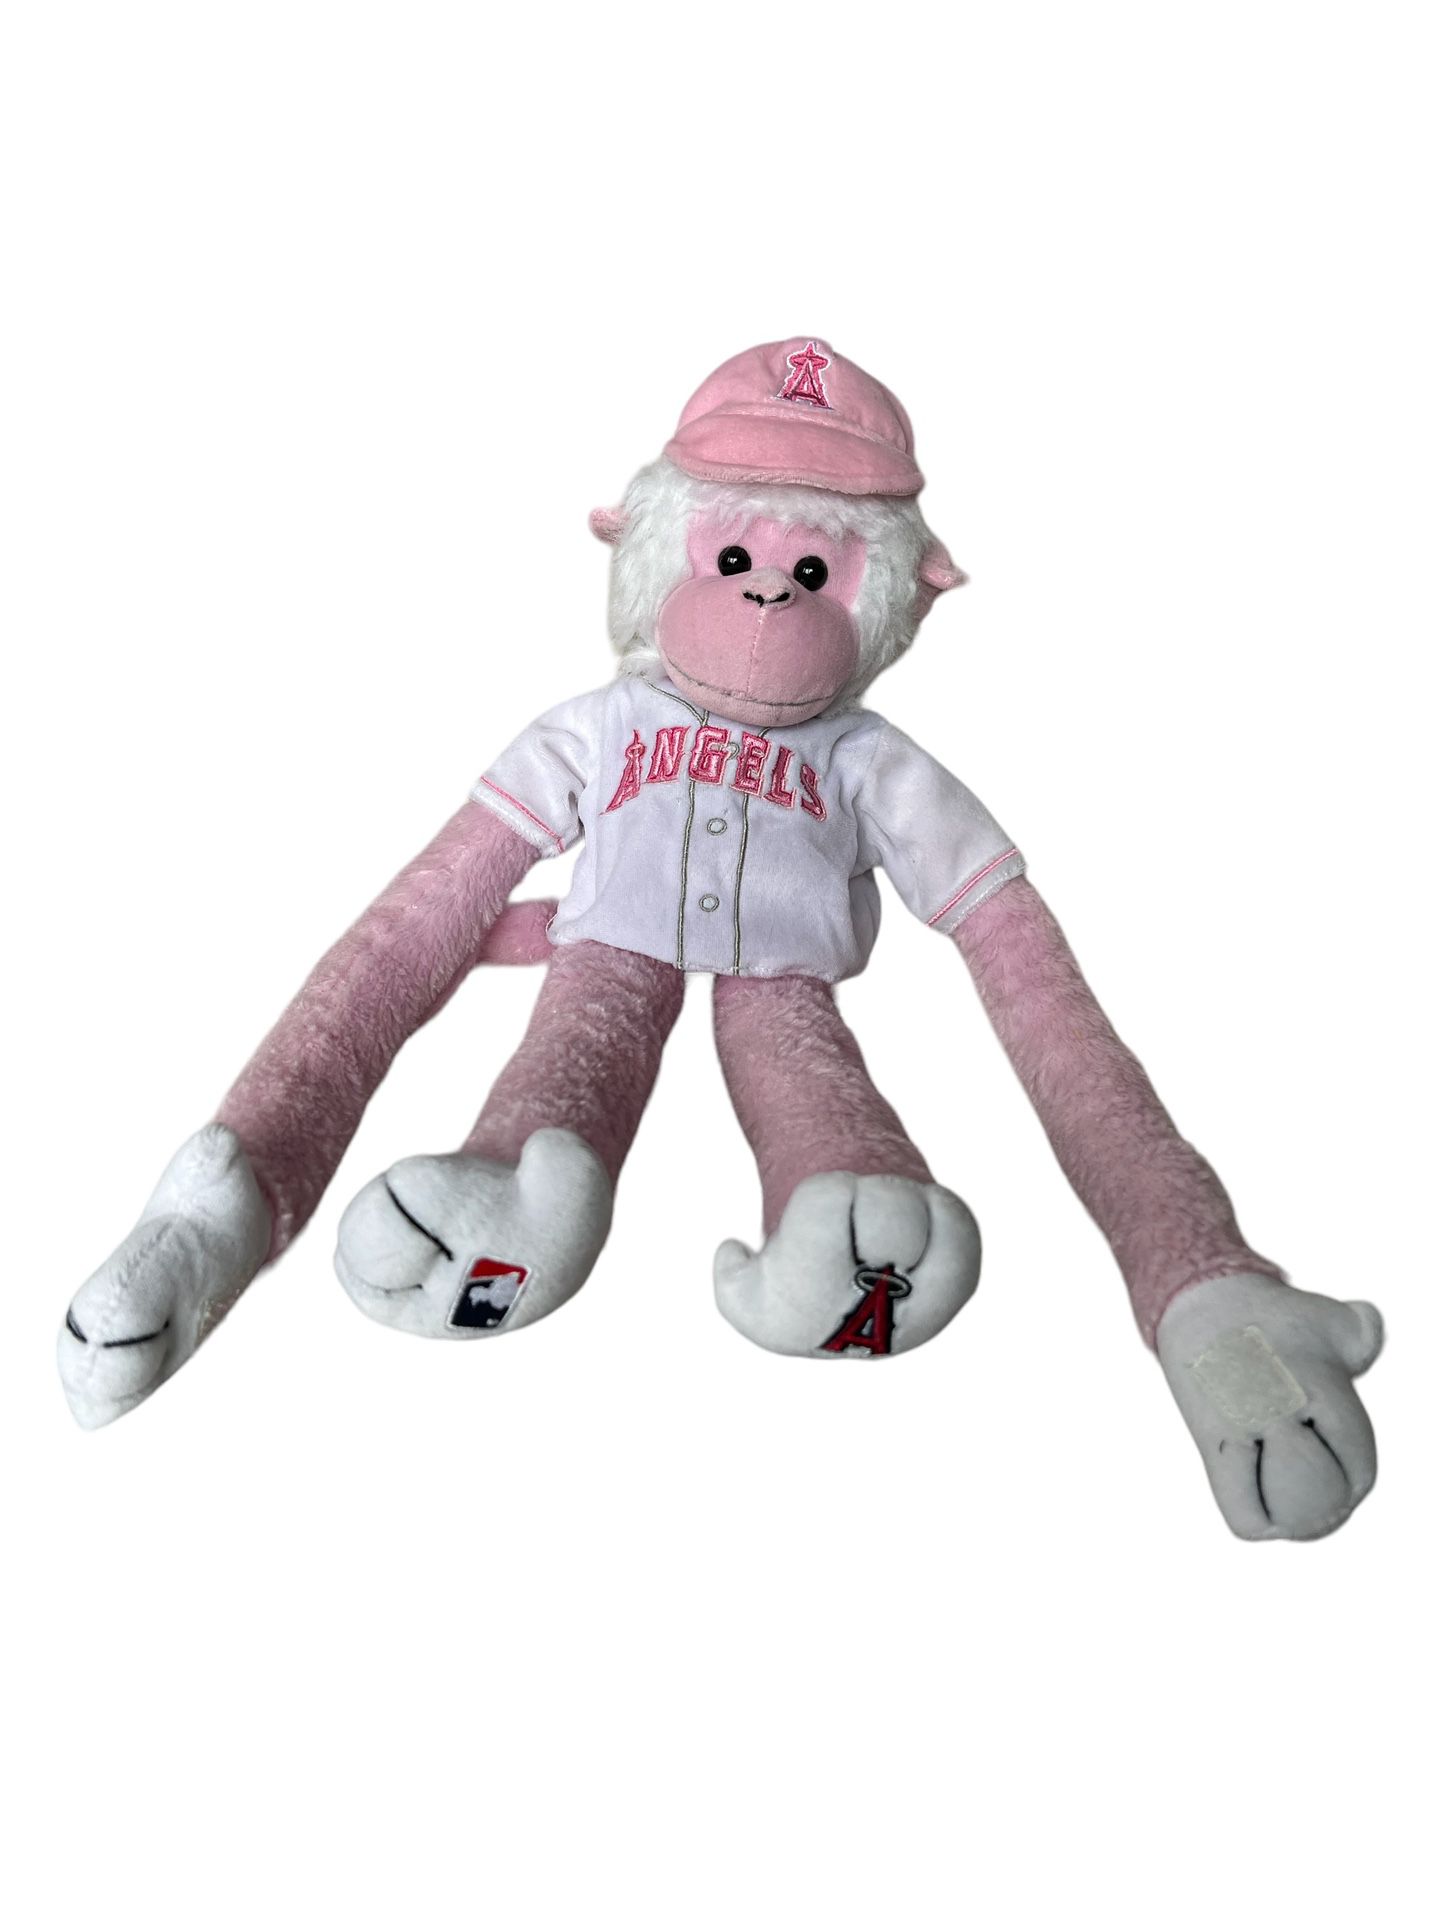 Star Wars Han Solo Los Angeles Angels Rally Monkey for Sale in